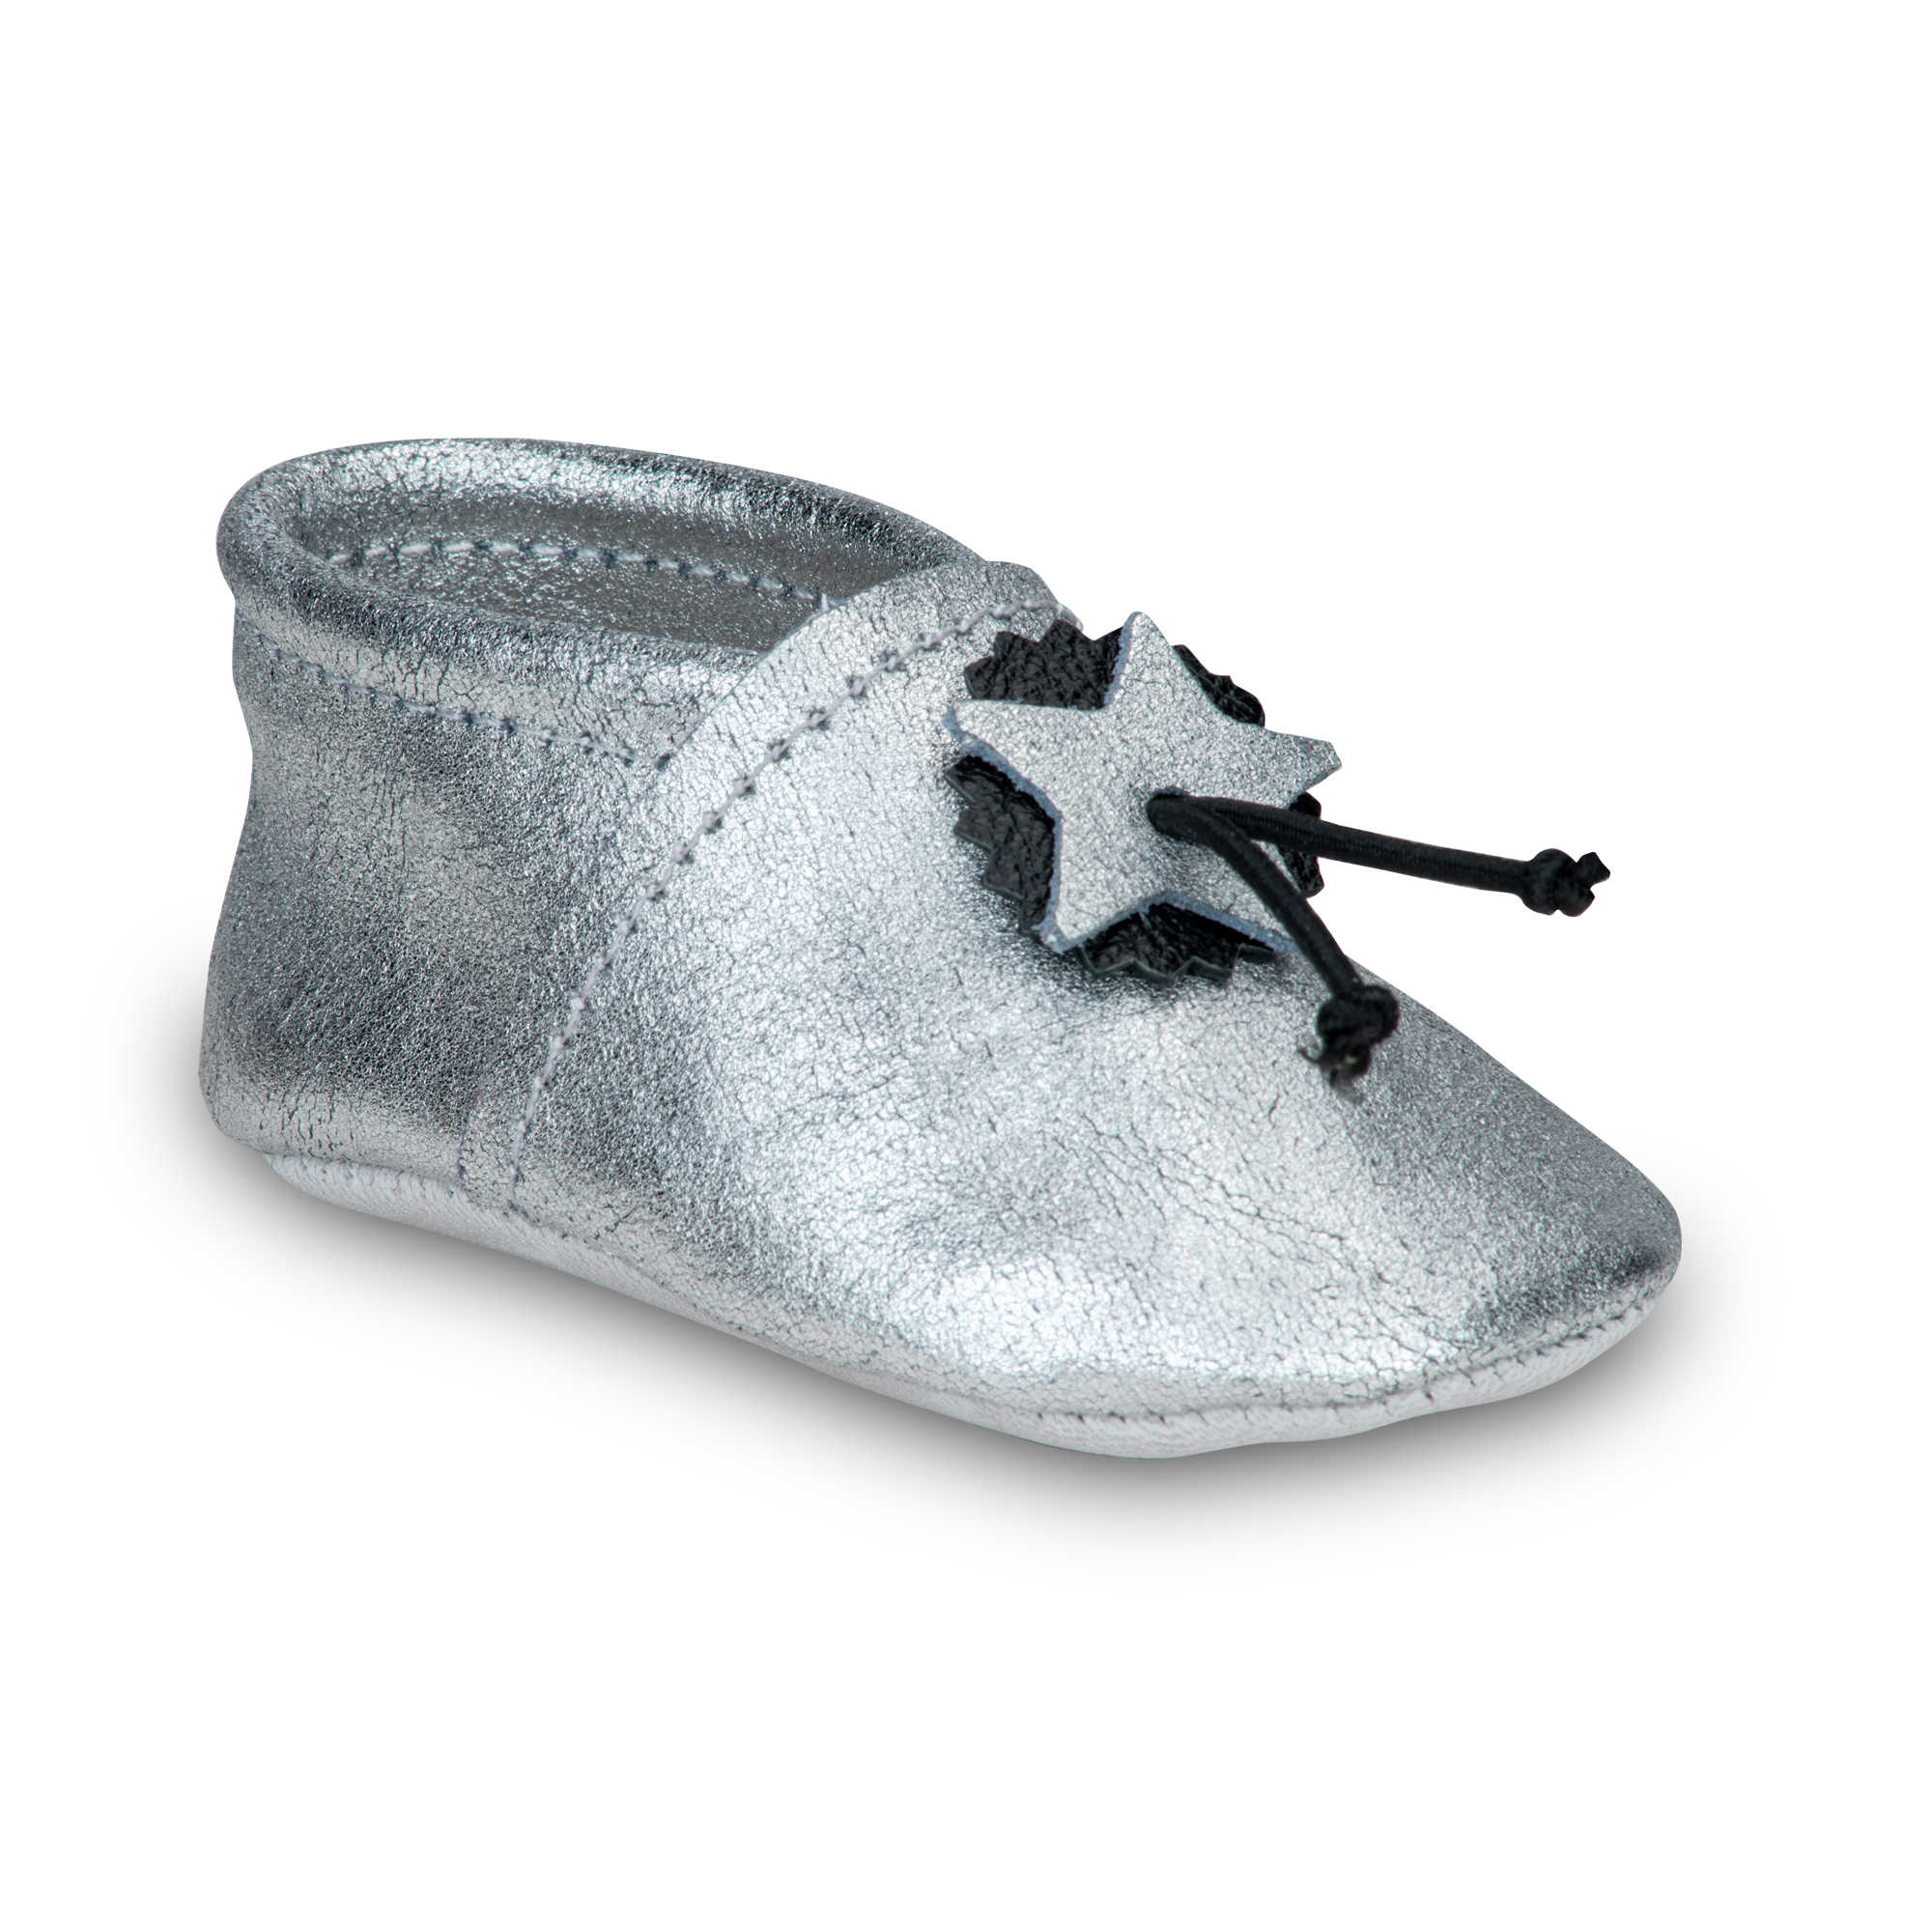 Chaussons souples bebe argente taille 24